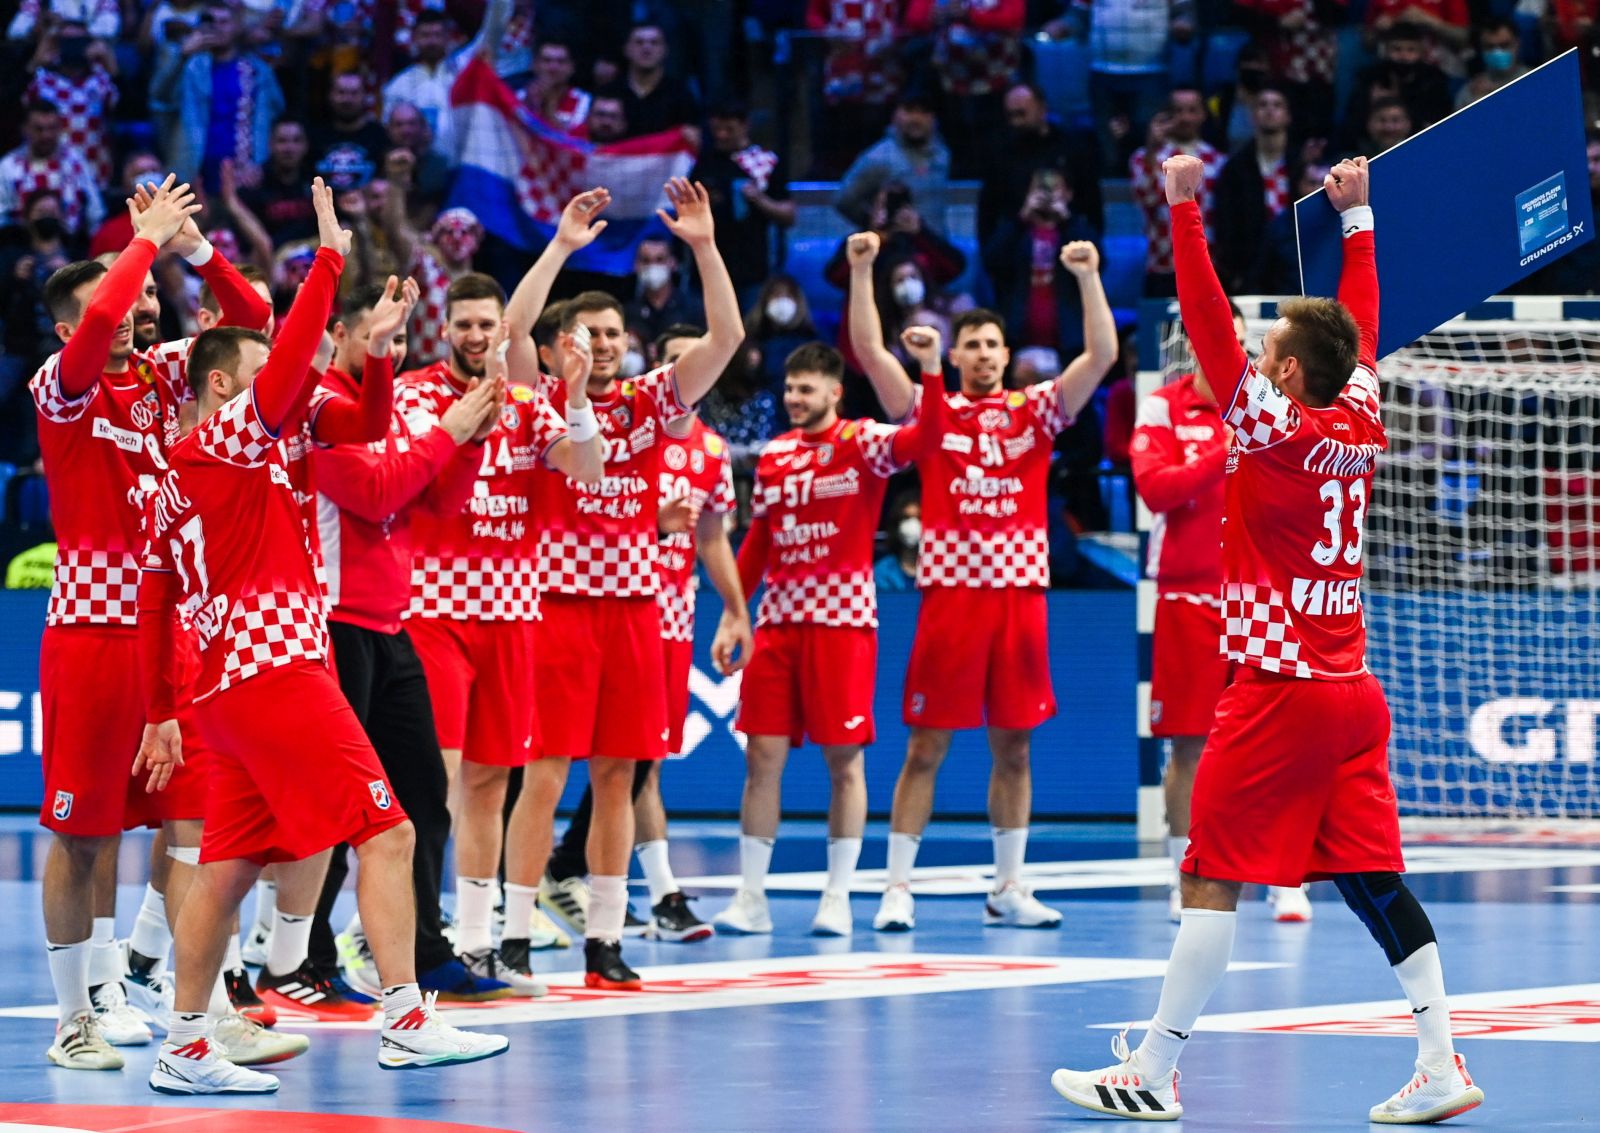 epa09688409 Players of Croatia celebrate after winning the Men's European Handball Championship Group C preliminary round match between Croatia vs Serbia at the Pick Arena in Szeged, Hungary, 15 January 2022.  EPA/Tibor Illyes HUNGARY OUT